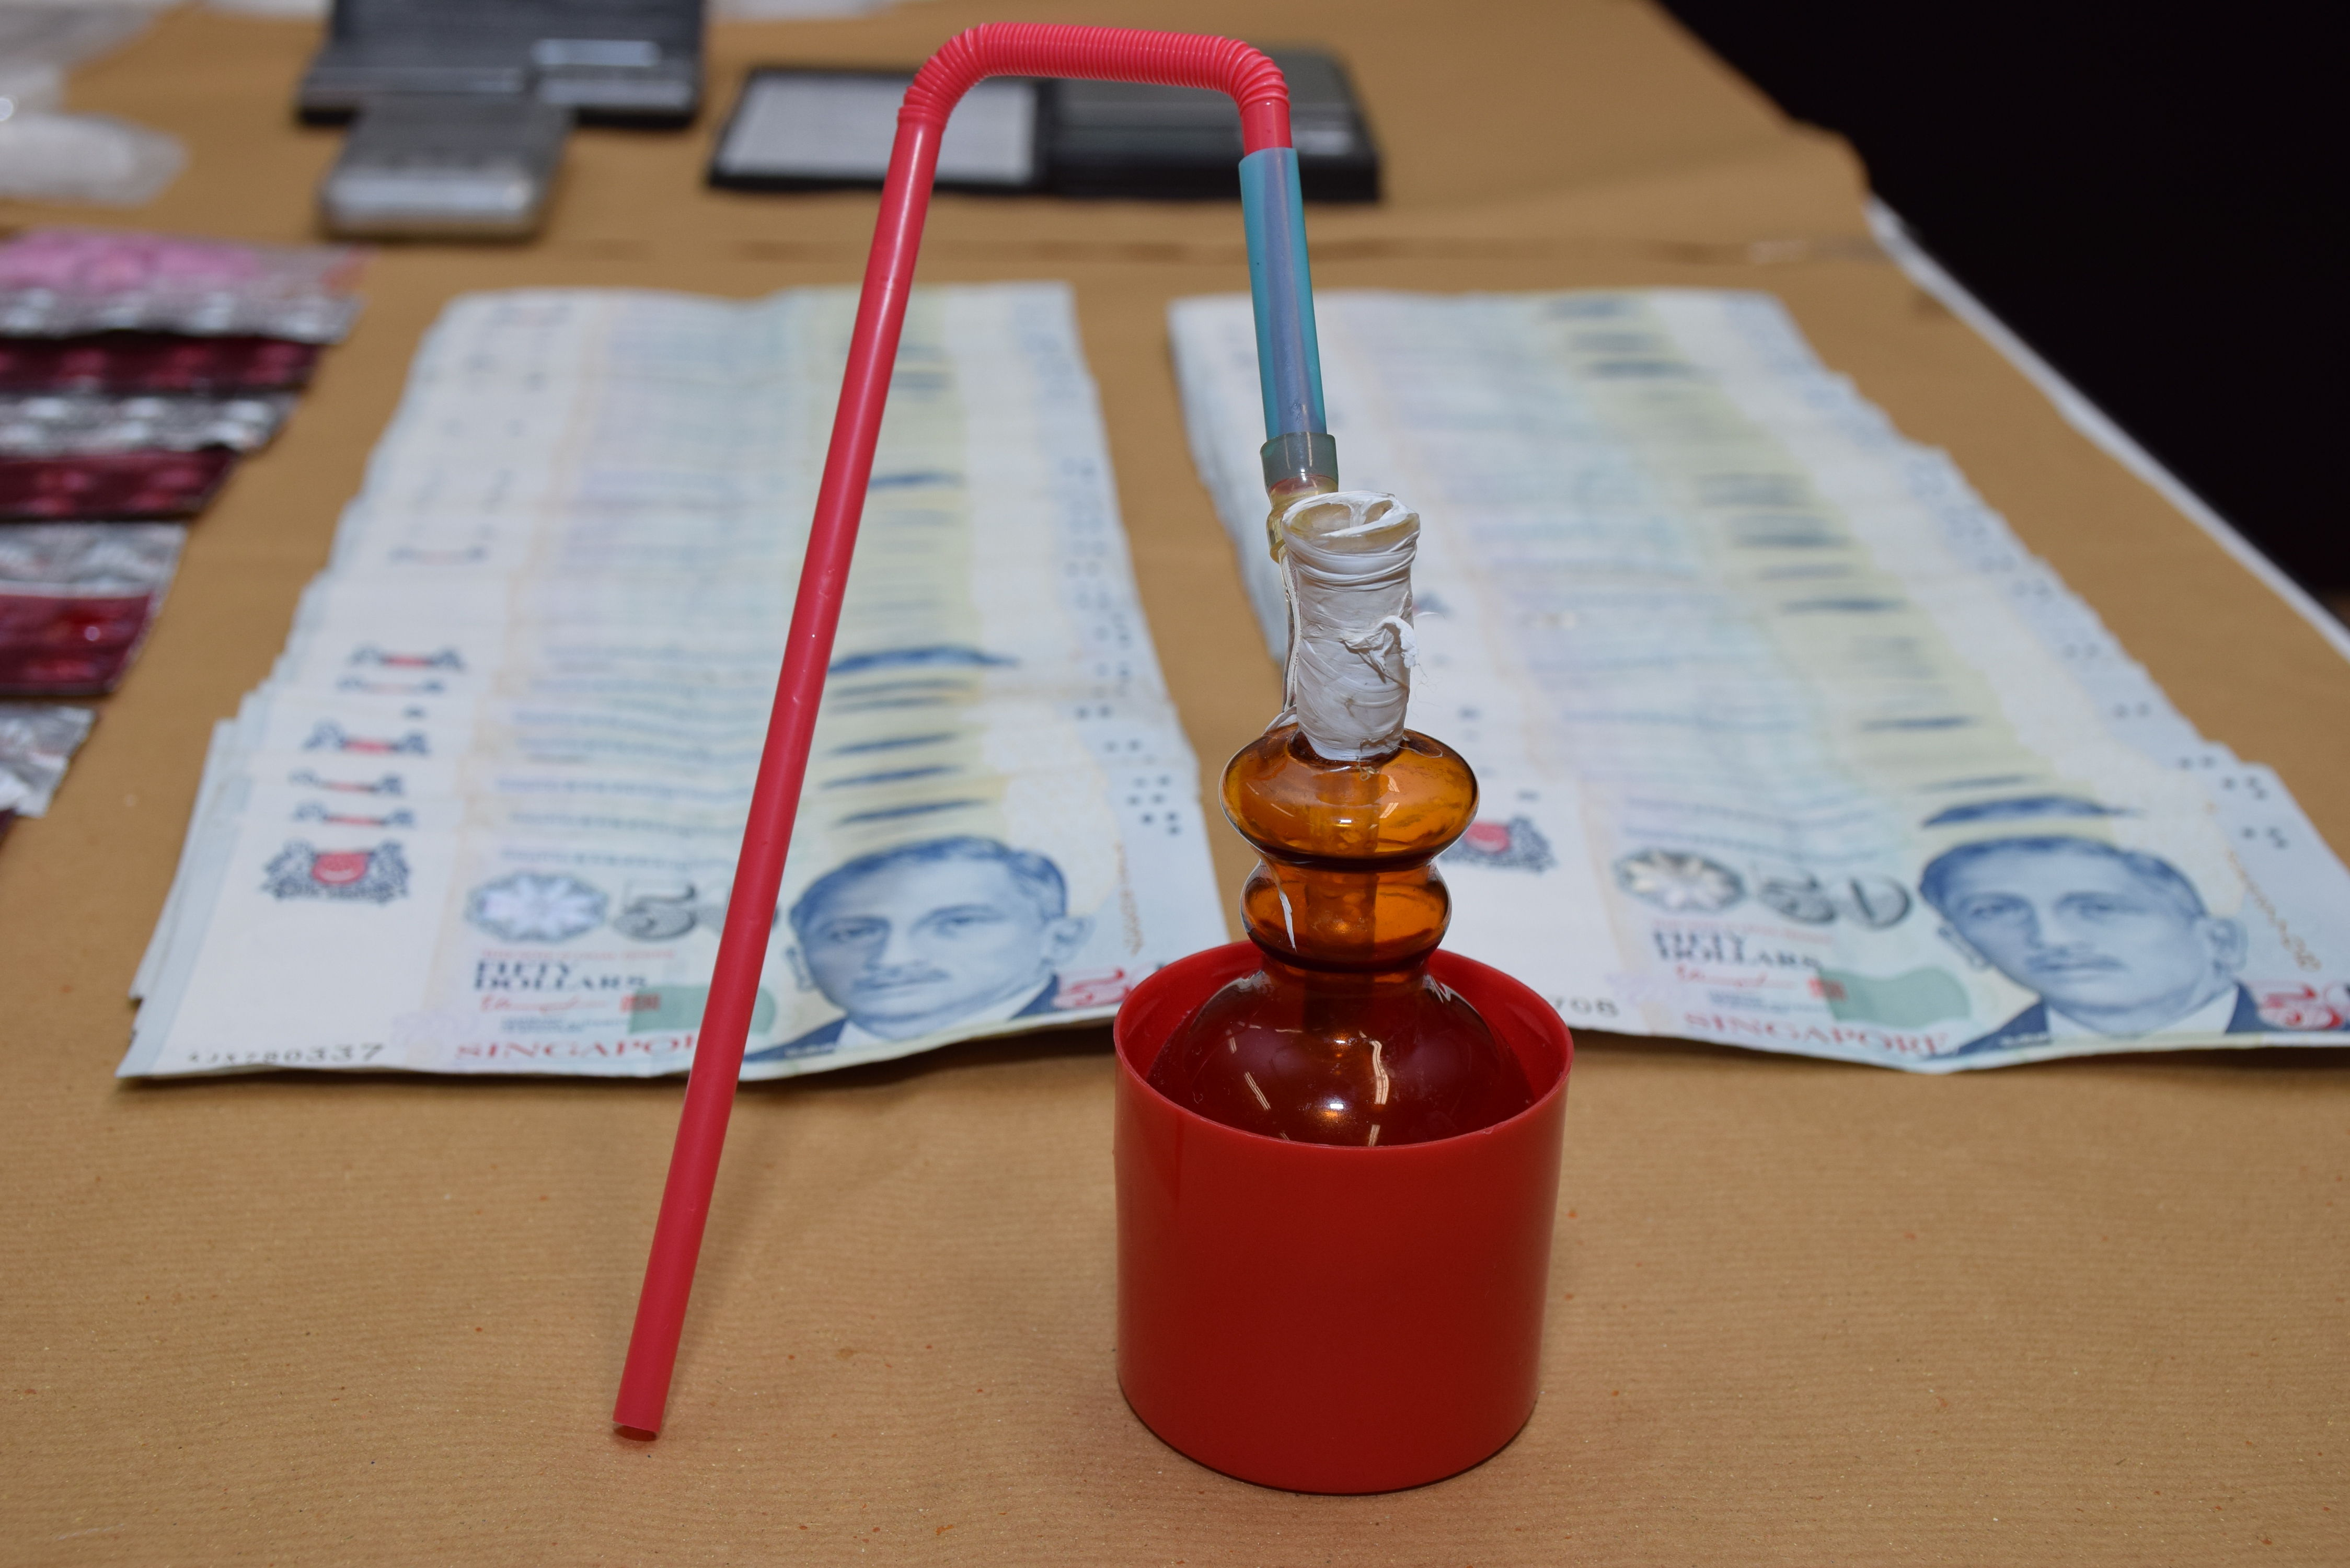 Photo 2: Drug paraphernalia and cash seized from CNB operation on 8 December 2015.